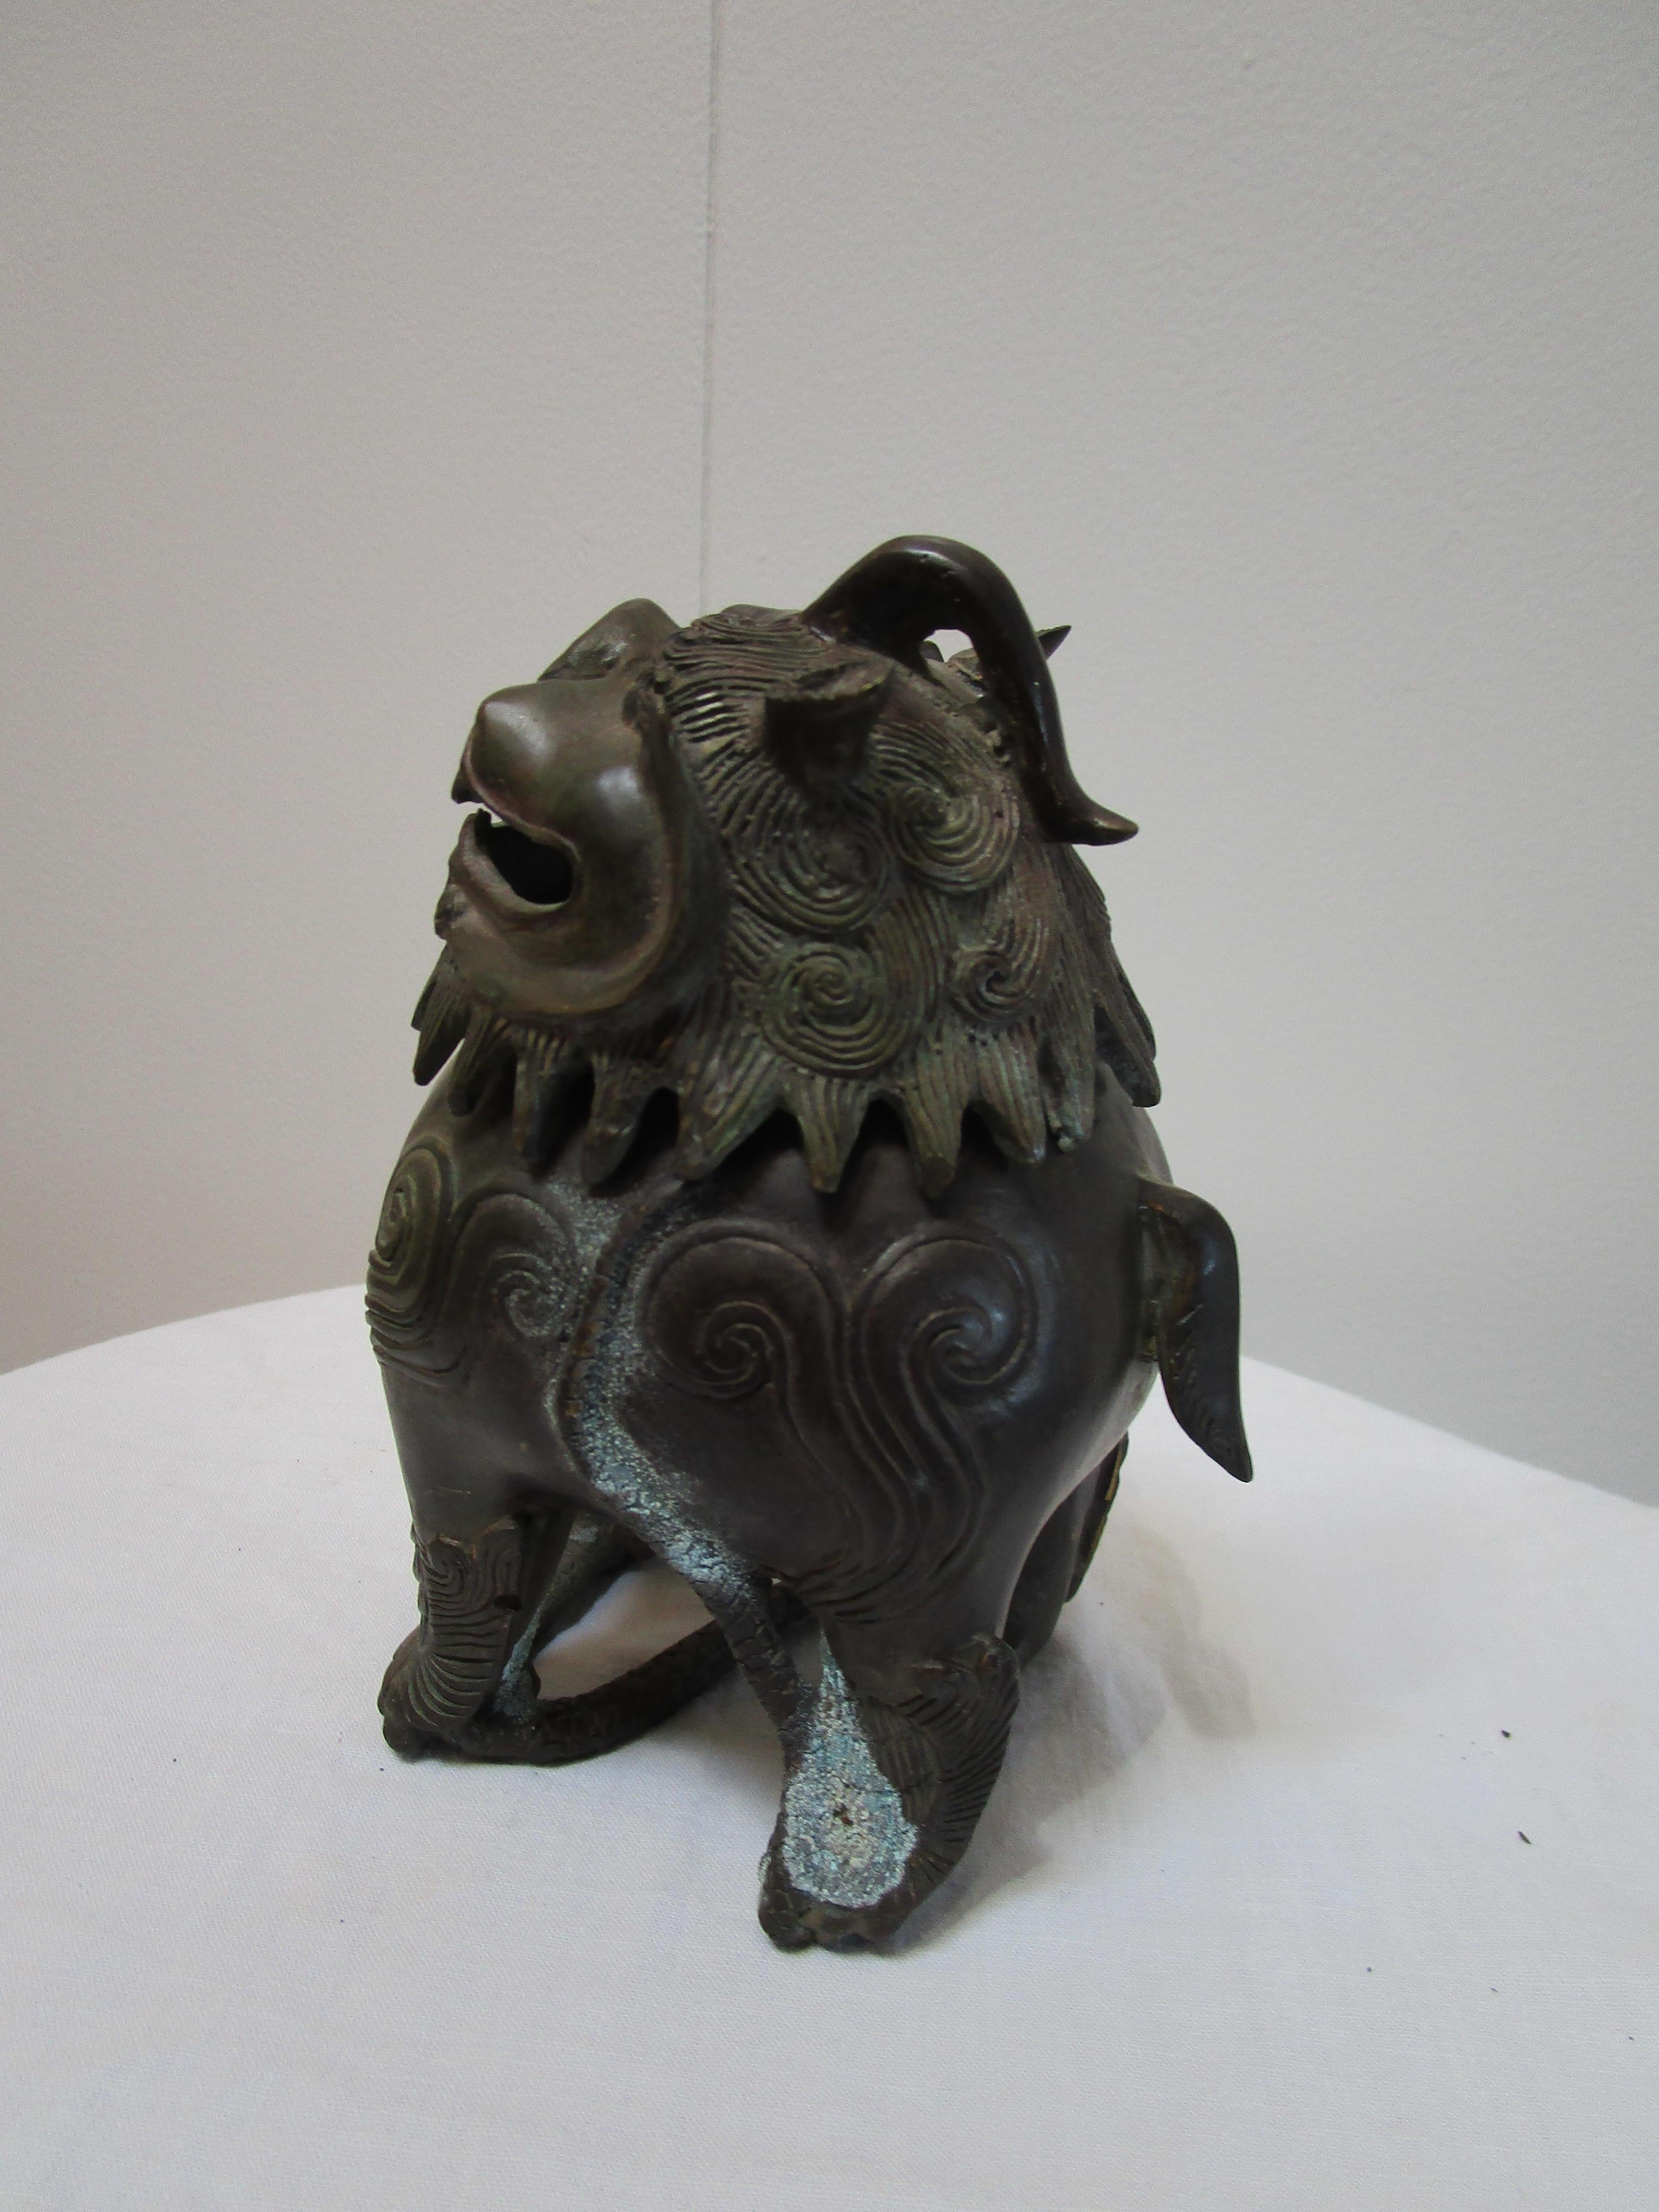 Cast Two Chinese Guardian Lions in Bronze, Iron, Early 20th Century